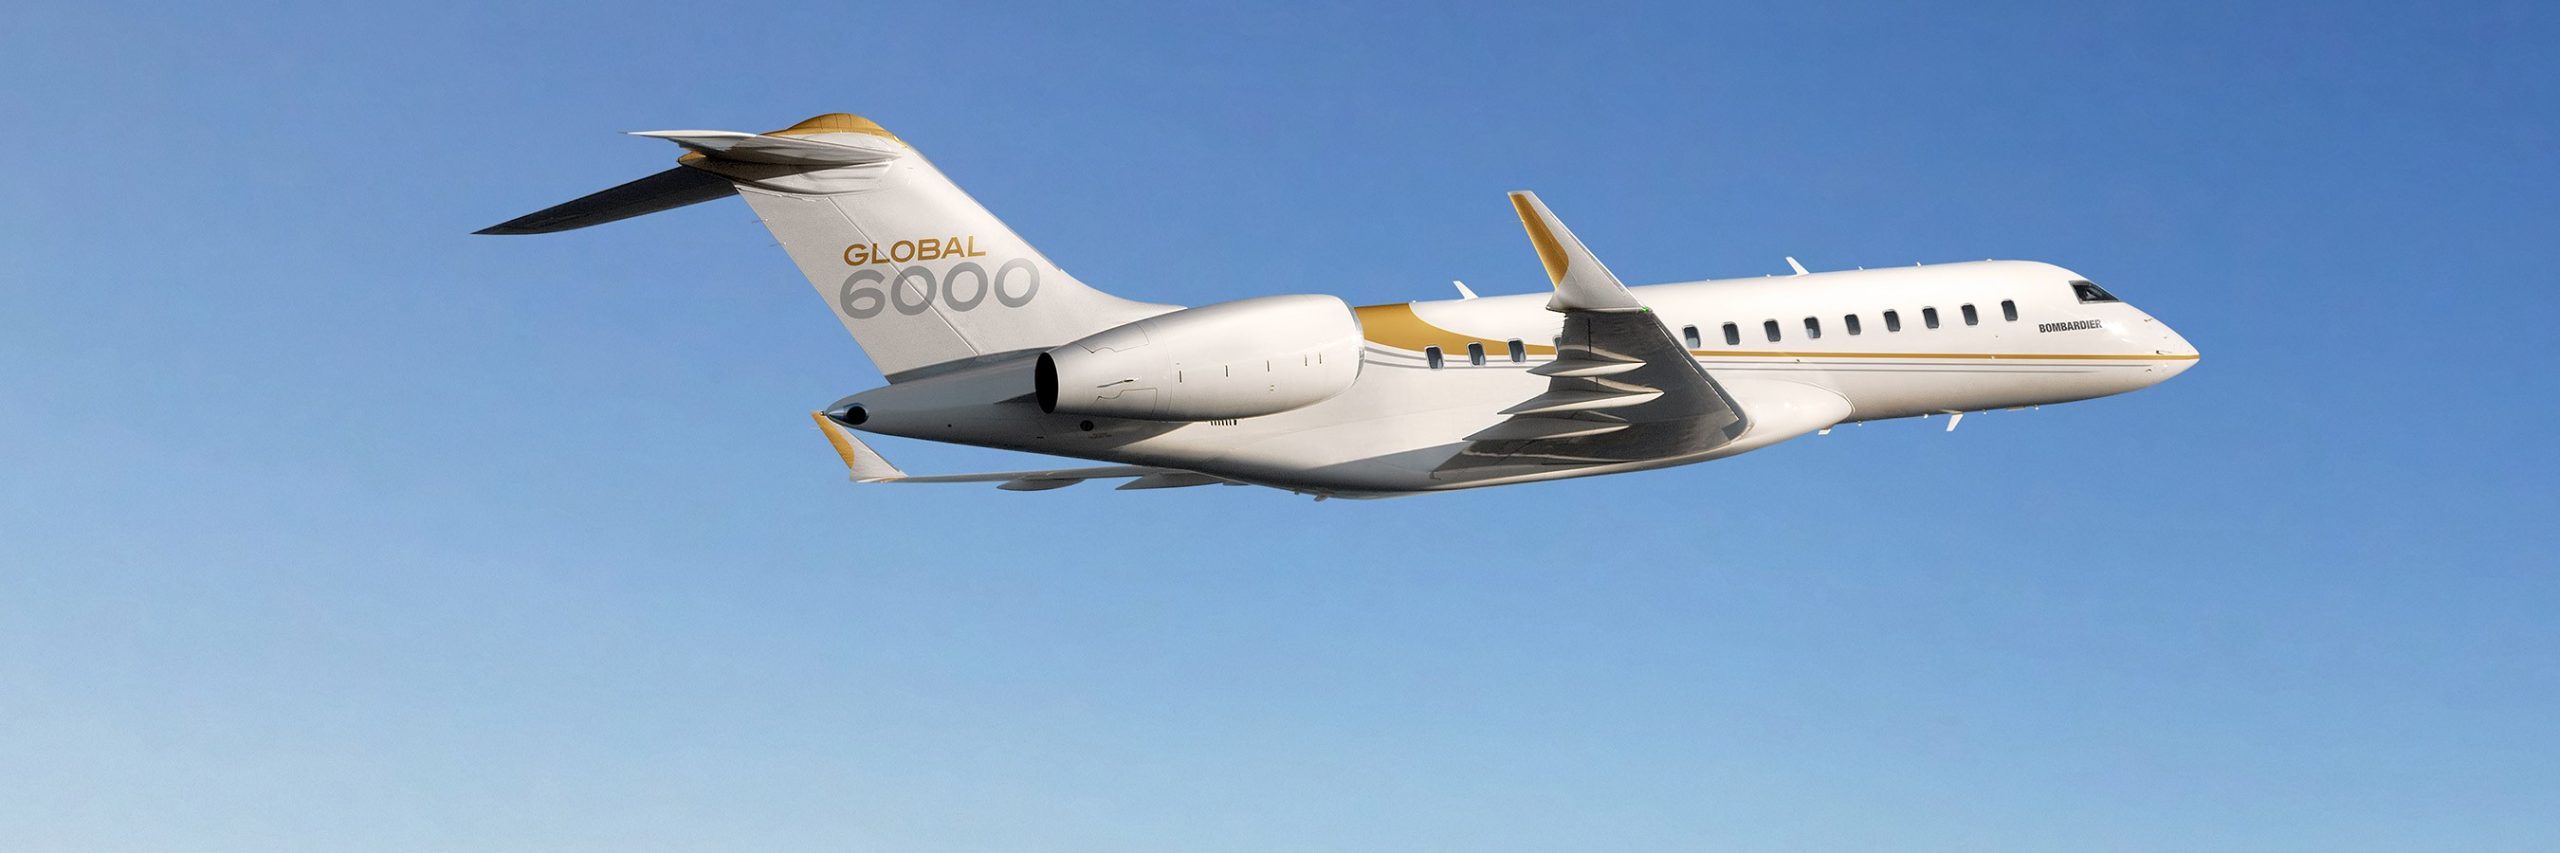 Bombardier Global 6000 1 scaled